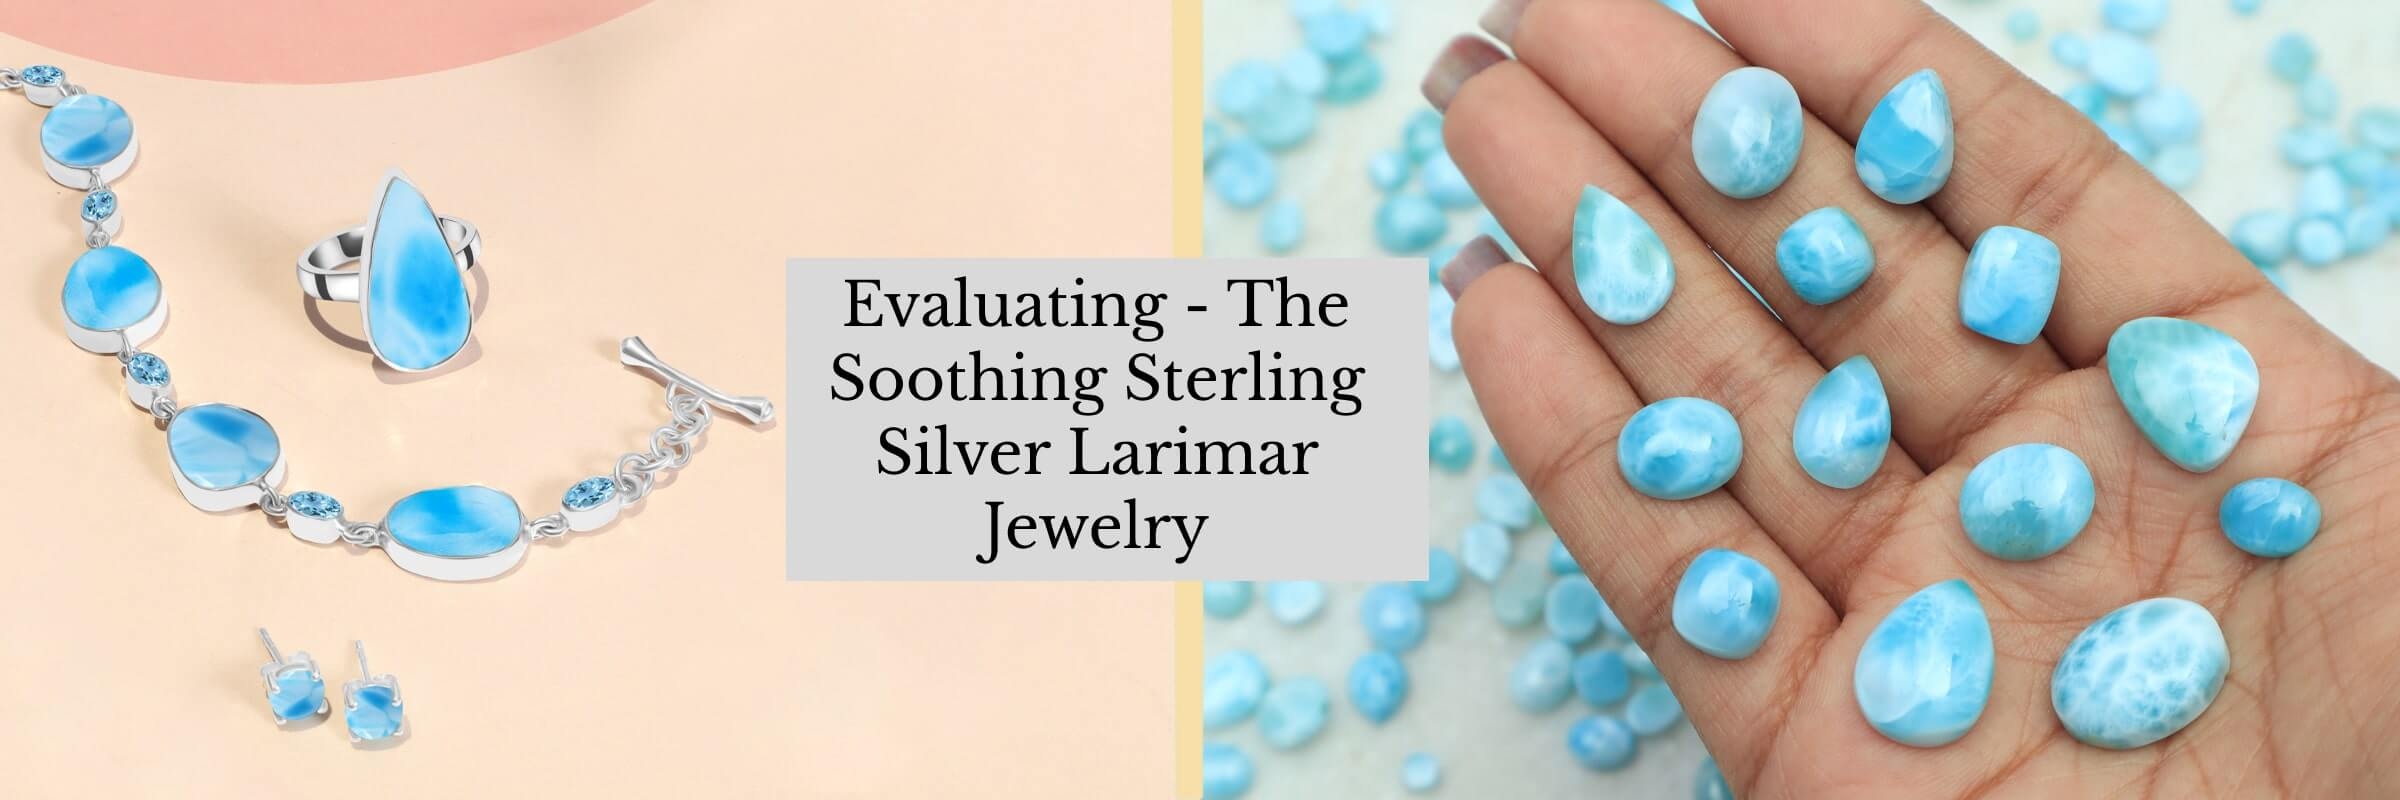 Price of Sterling Silver Larimar Jewelry